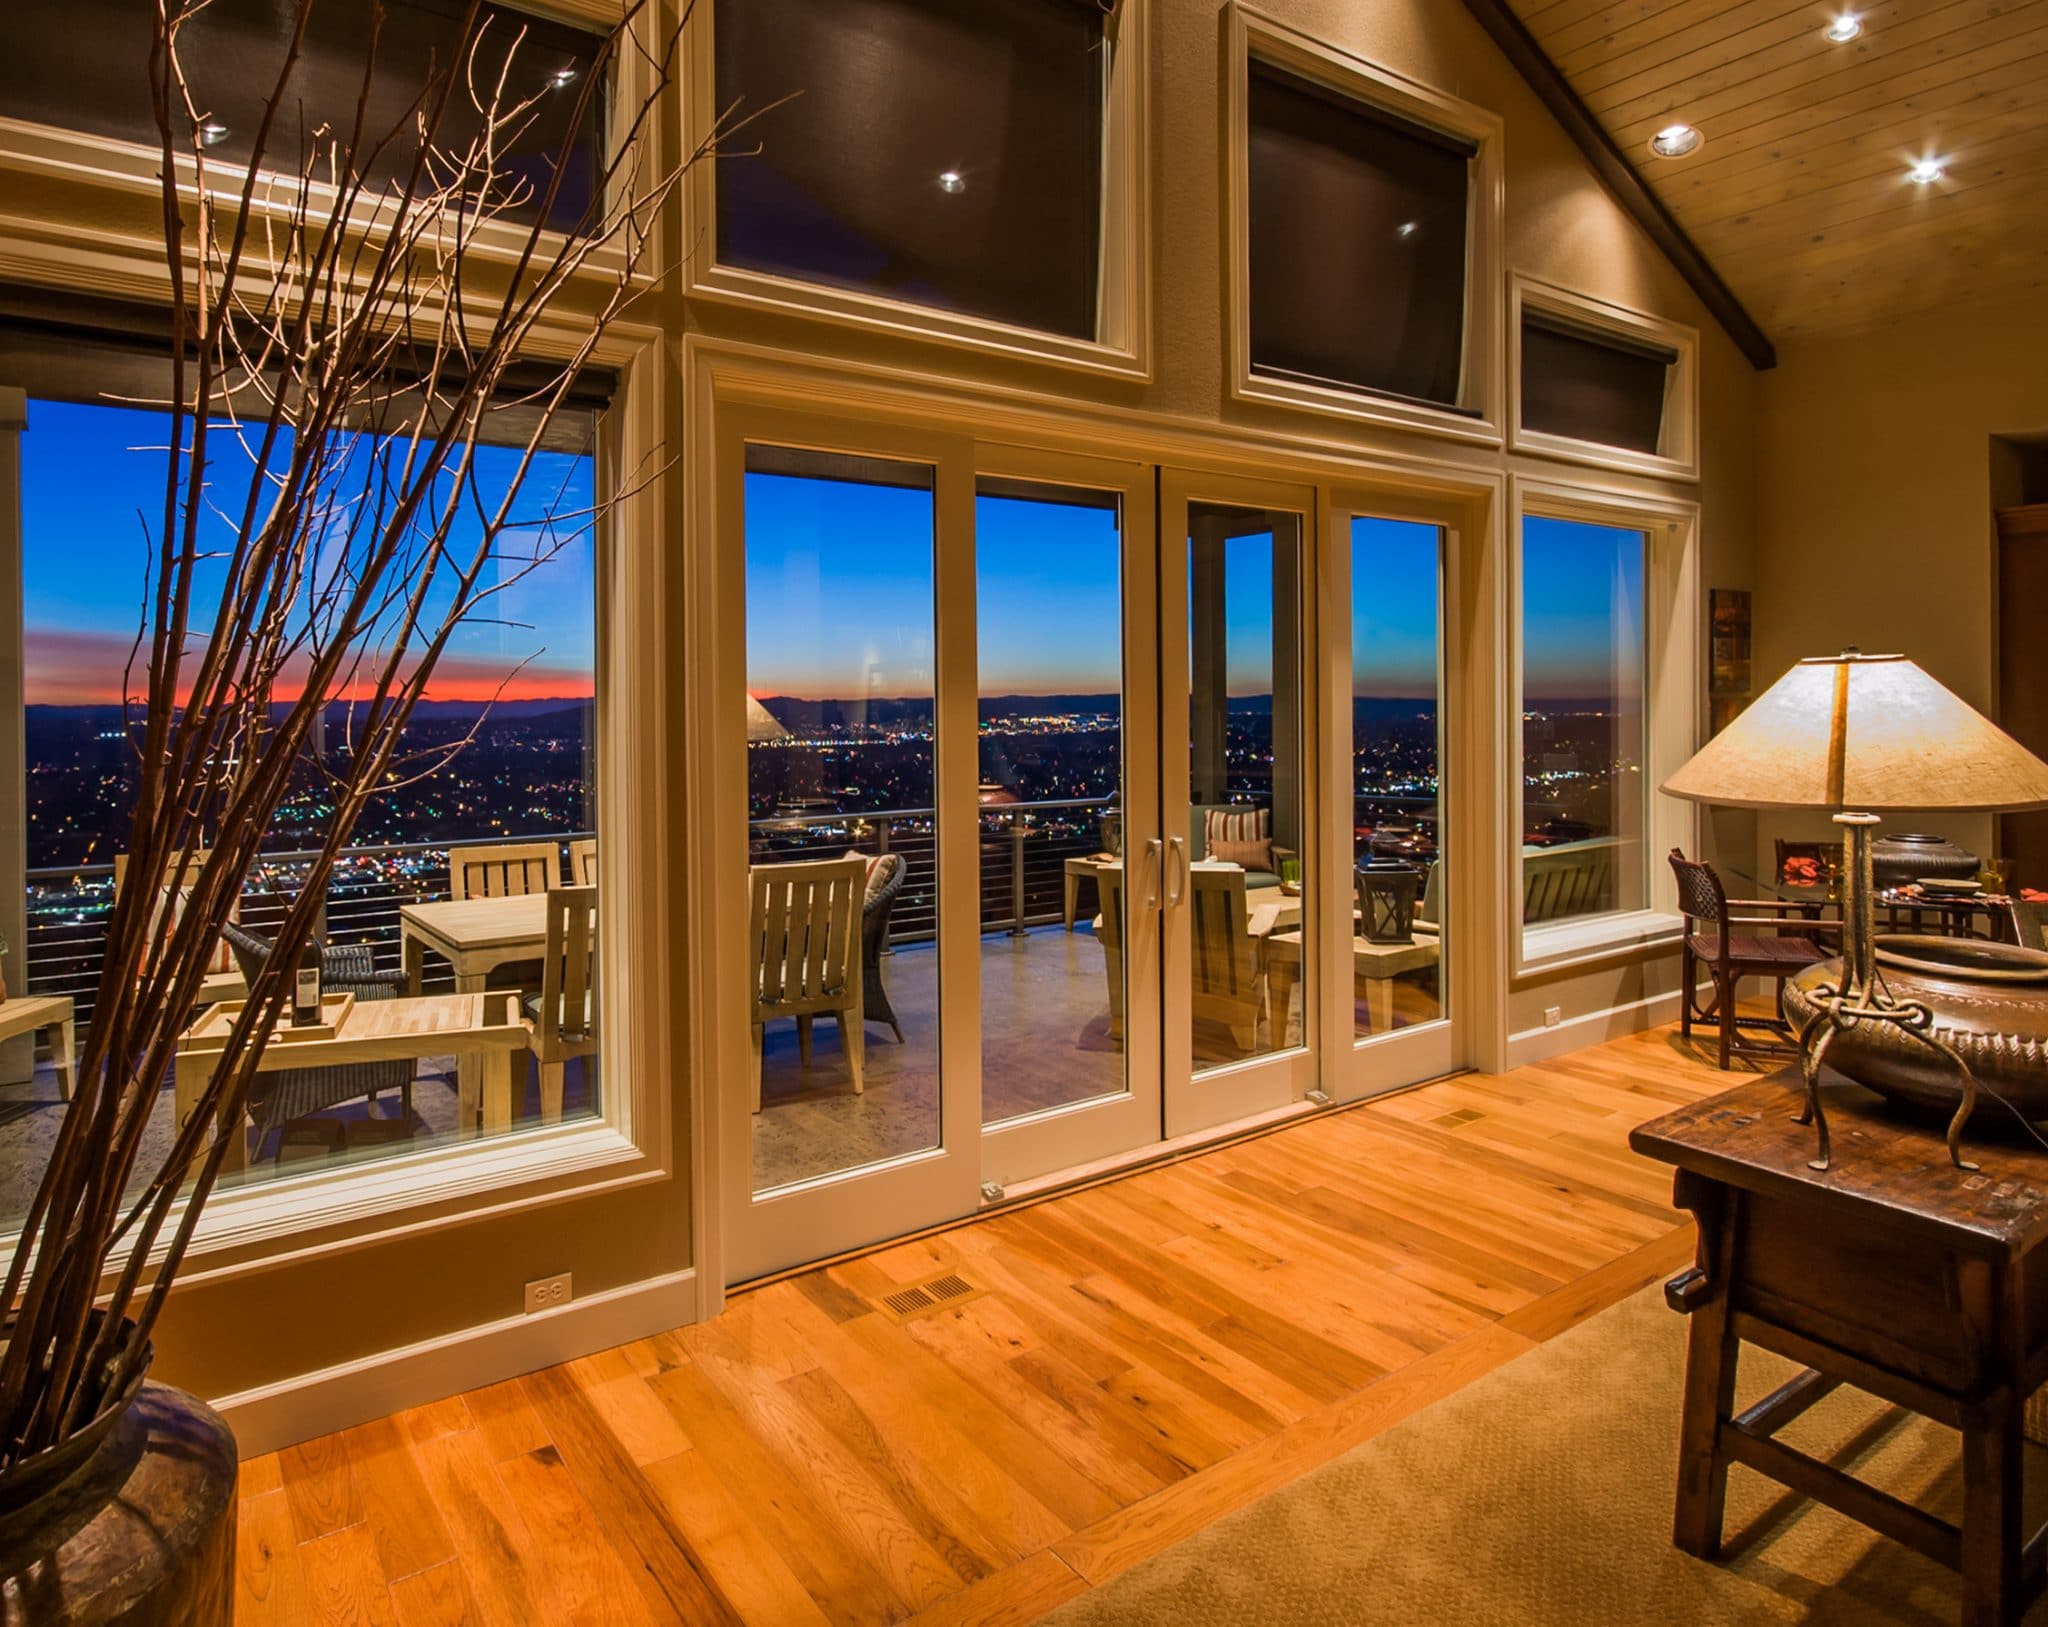 Living Room With Amazing Sunset View In New Home | Murray Glass